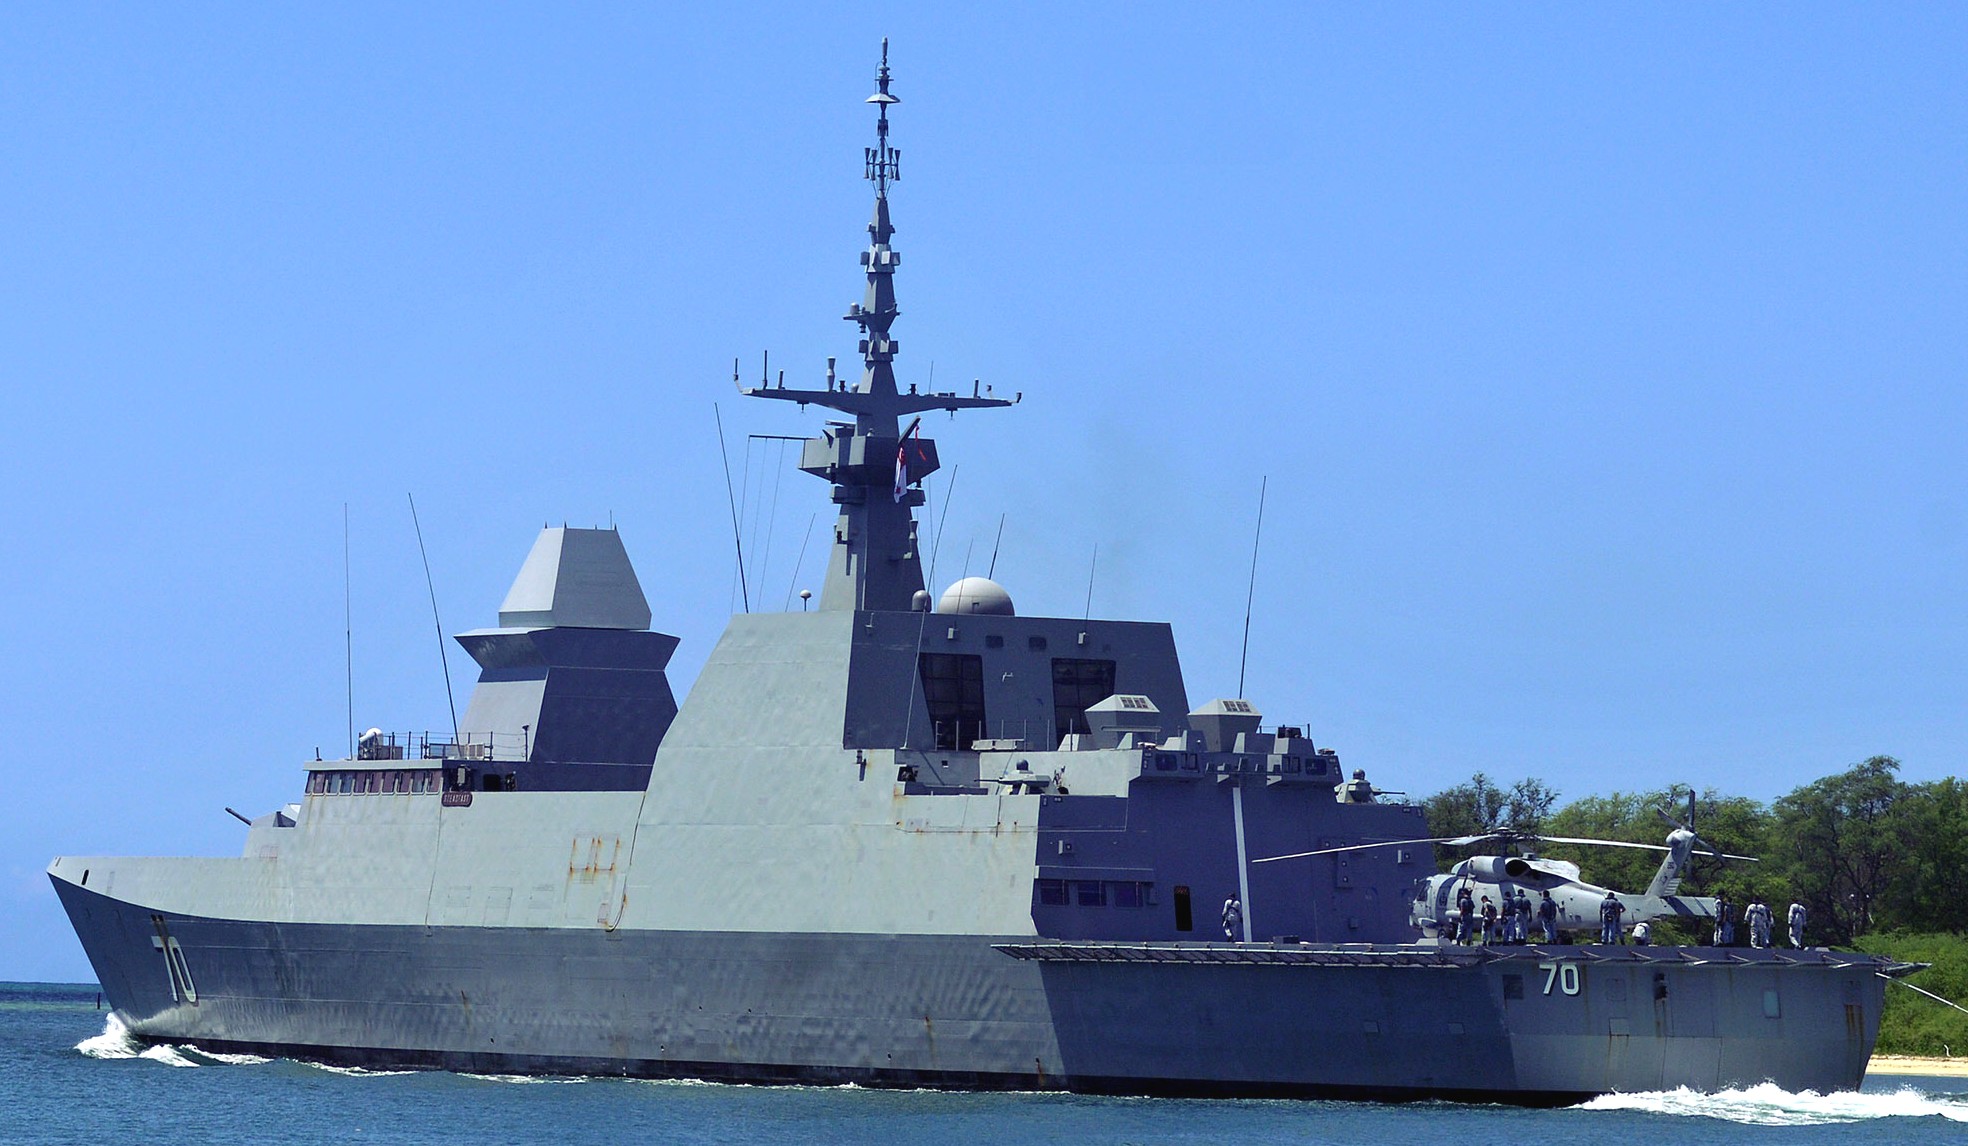 70 rss steadfast formidable class multi-mission missile frigate ffg republic singapore navy exercise rimpac 21